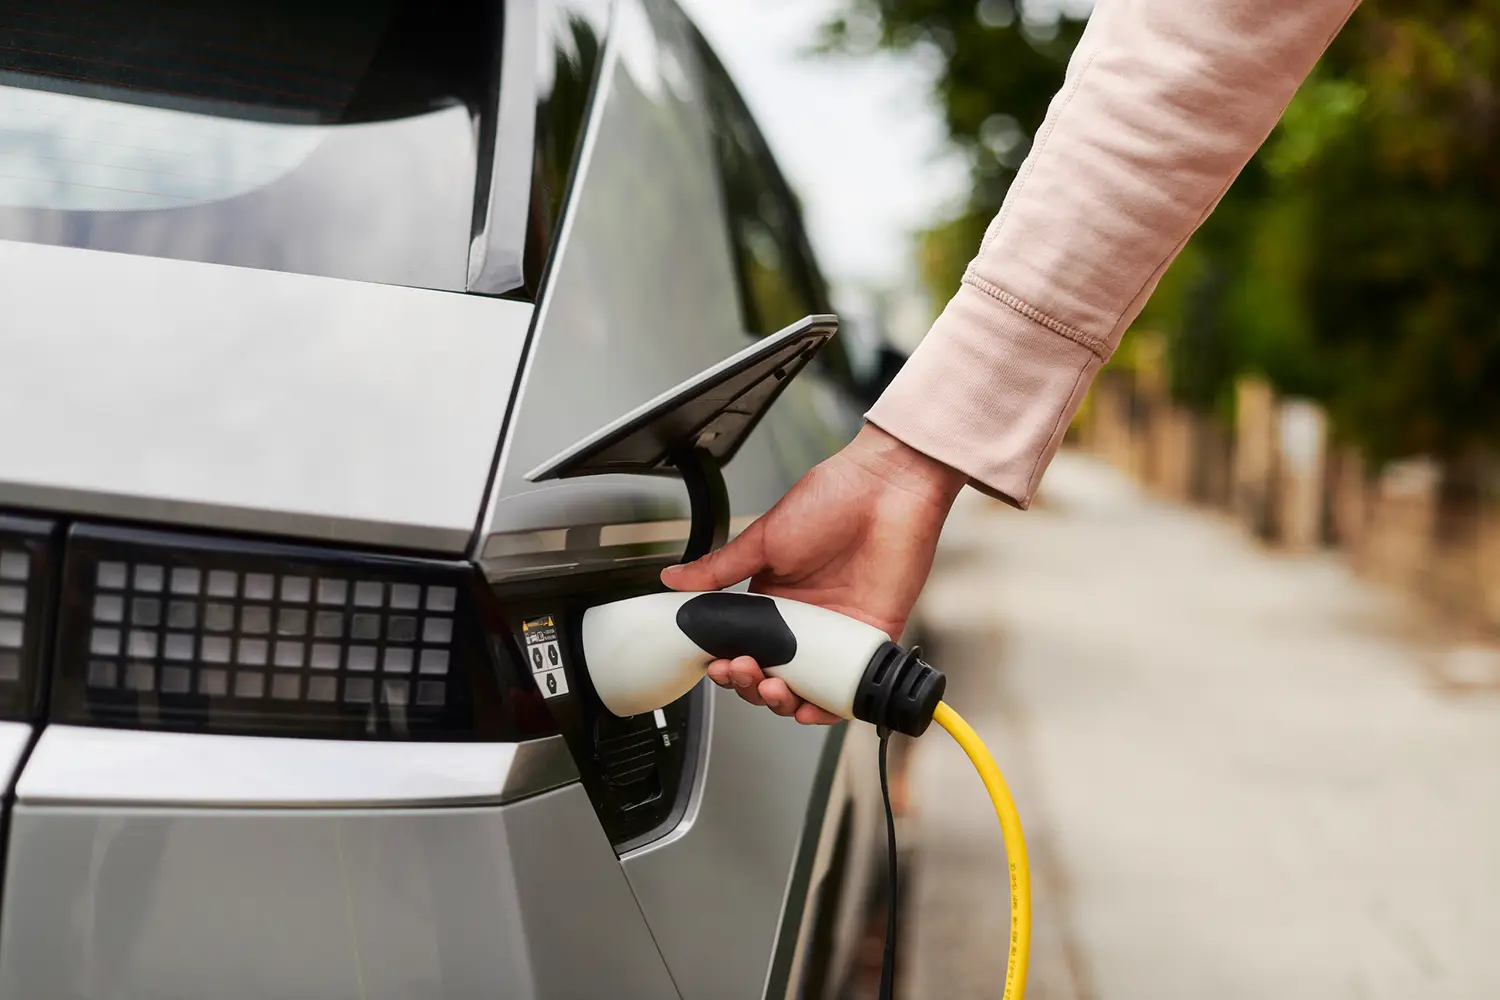 West Suffolk Council Picks ubitricity to Deploy and Manage Public Electric Vehicle Charge Point Network